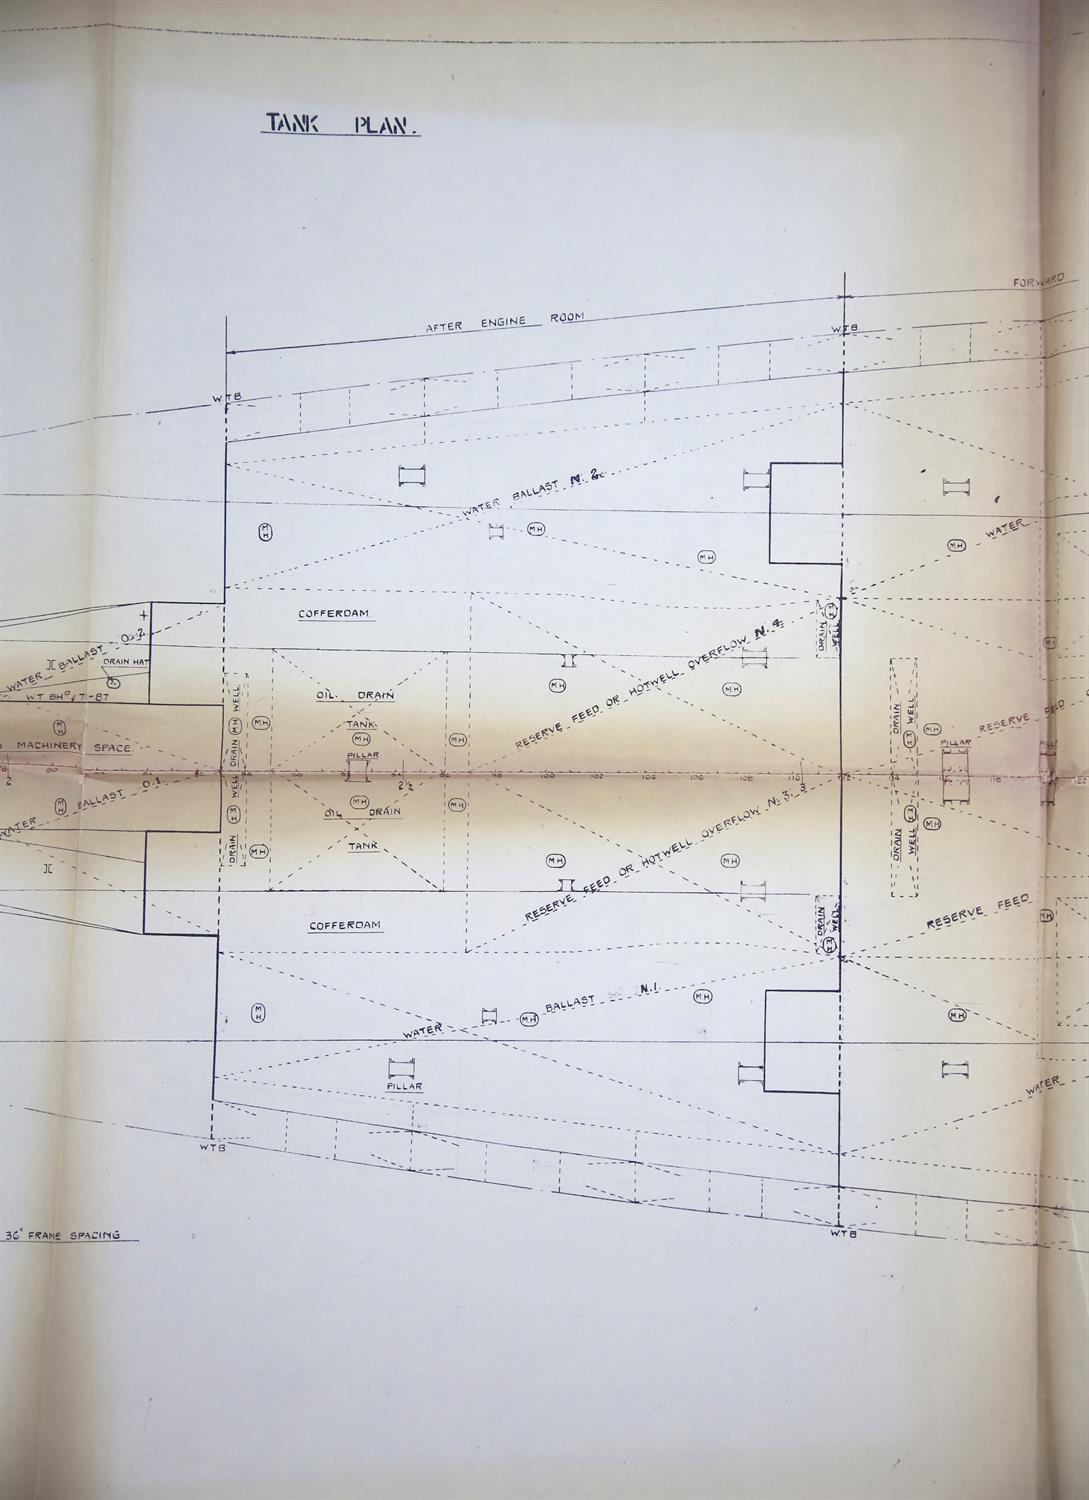 Full set of wartime deck plans for RMS Queen Mary, comprising 14 deck plans, each 2ft x 11ft and a - Image 44 of 80